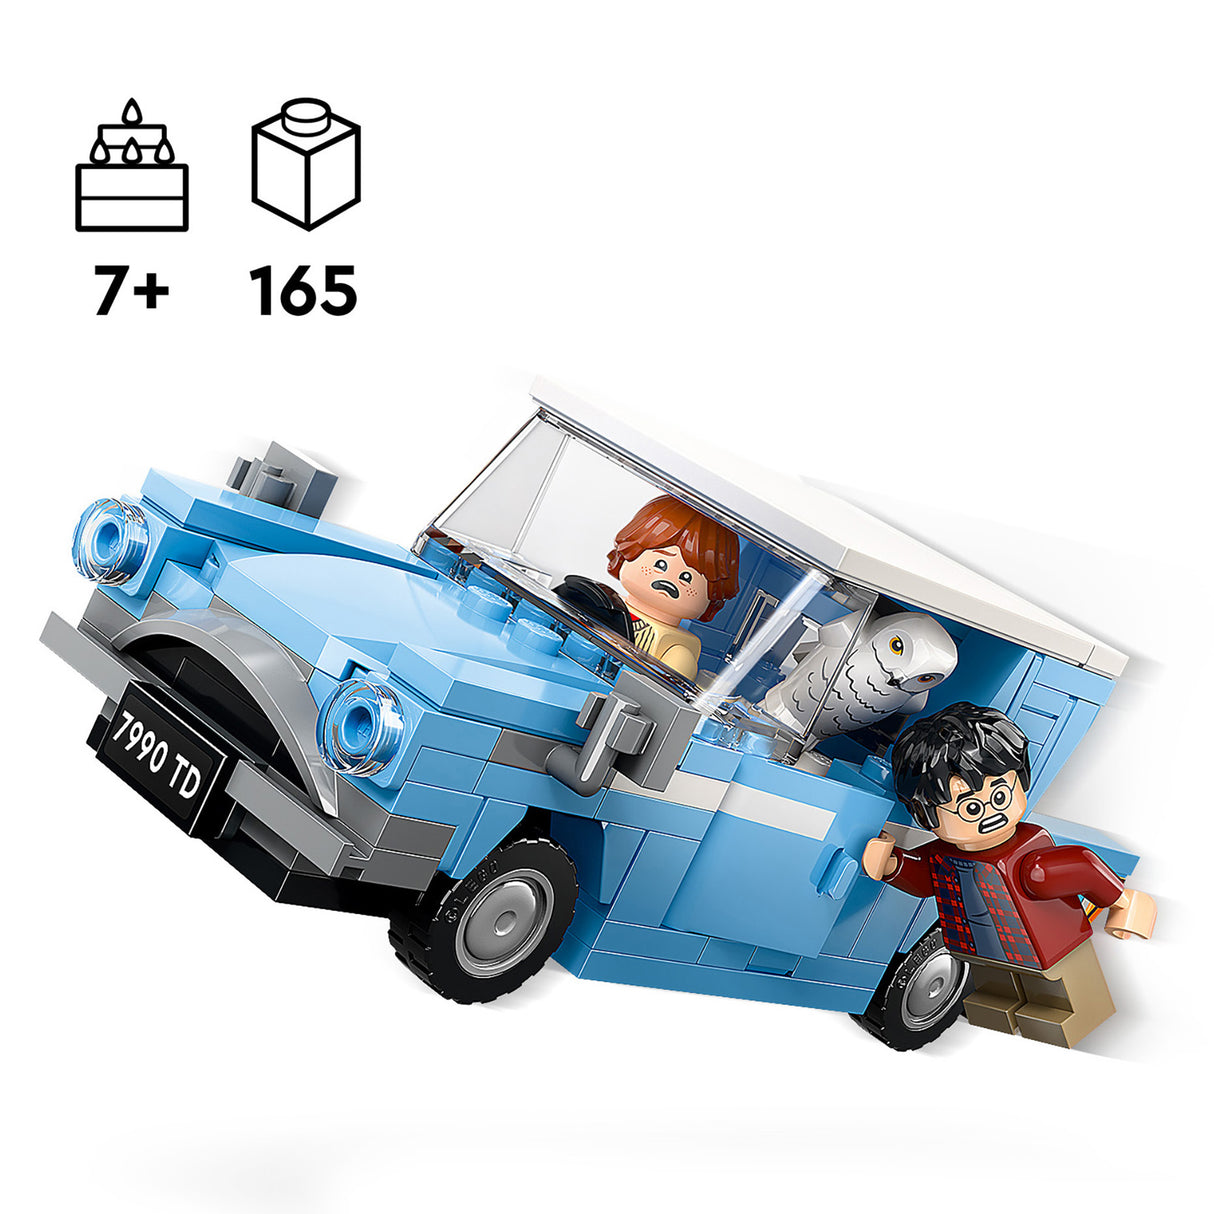 LEGO Harry Potter Flying Ford Anglia 76424, (165-Pieces)